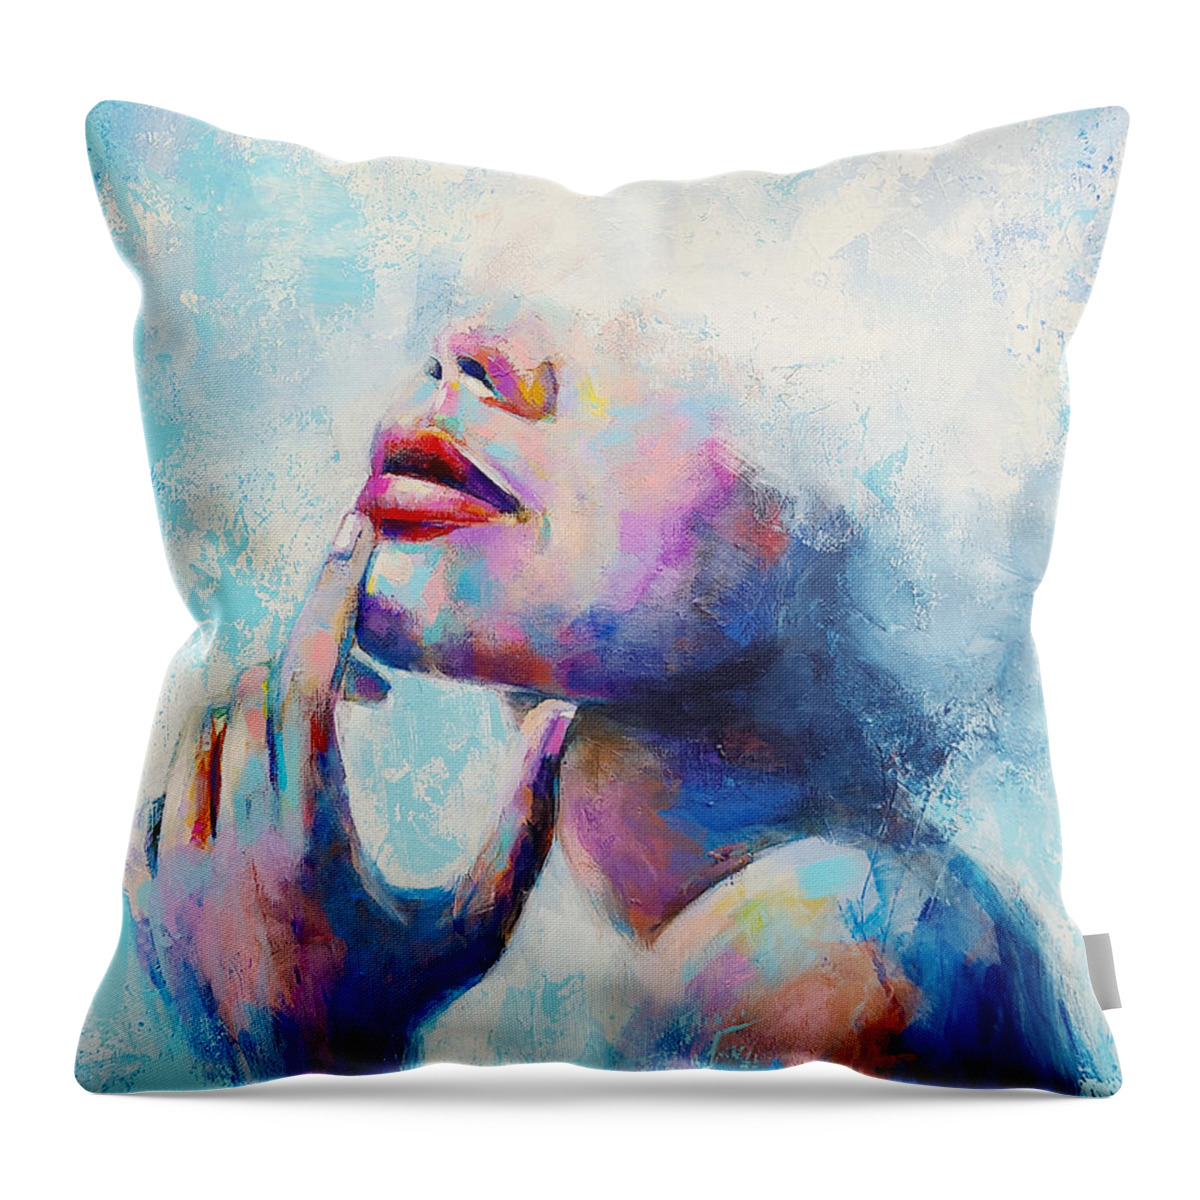 Head Throw Pillow featuring the painting Head On The Clouds by Luzdy Rivera